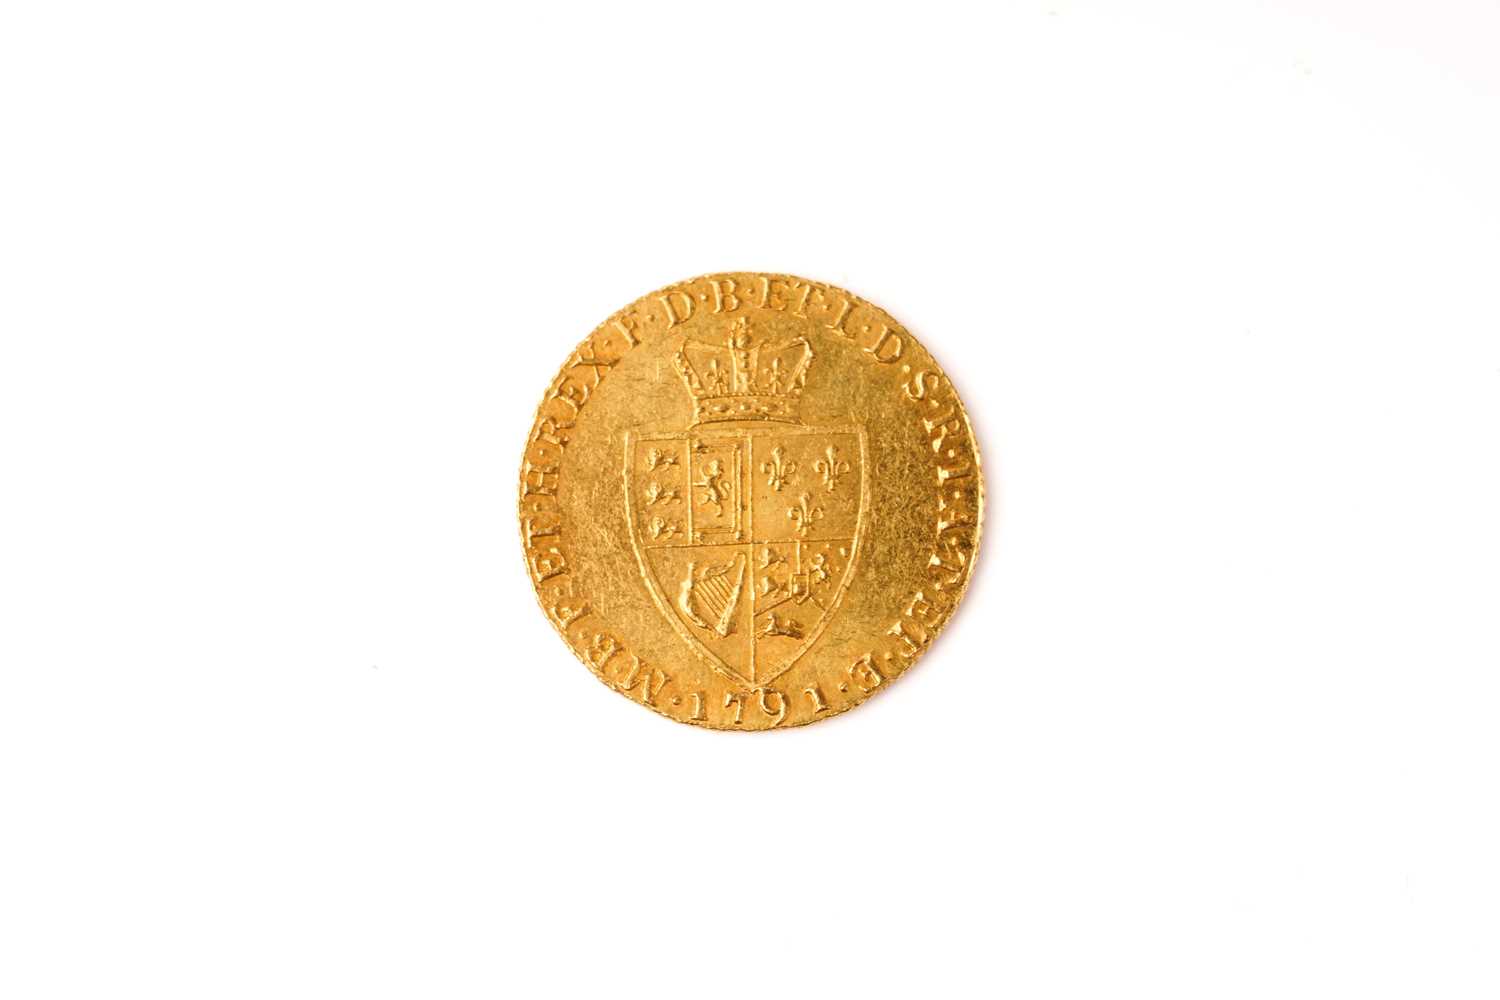 Geo III gold guinea, 1791, fifth laur. bust right, rev. crowned 'spade' shield. VFVF. No mounting - Image 2 of 2